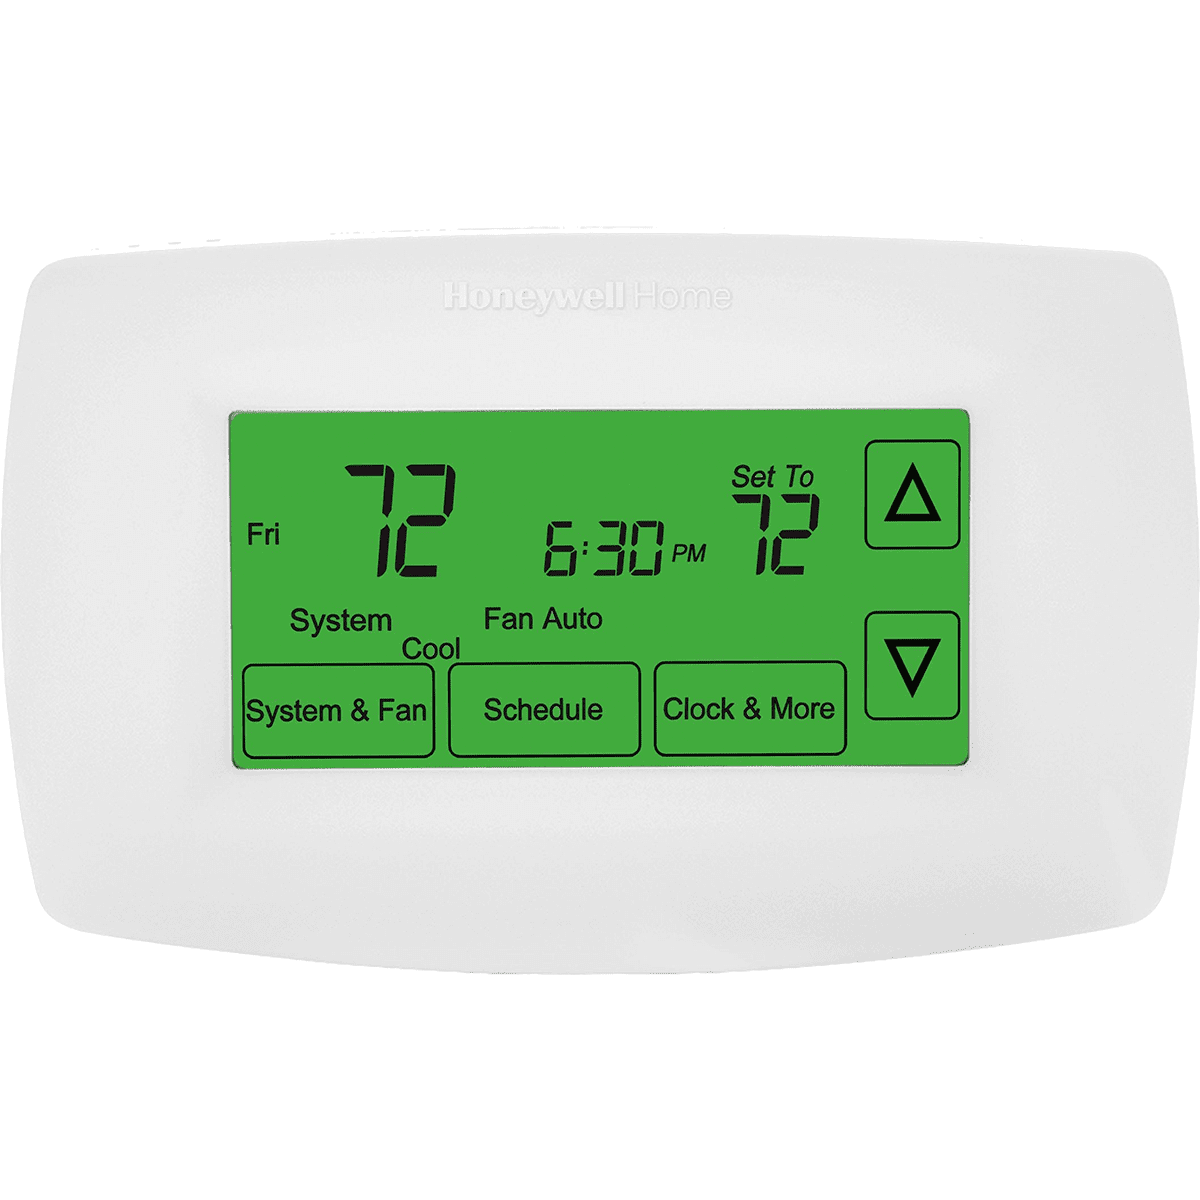 Honeywell 7 Day Programmable Thermostat W/ Touchscreen Display